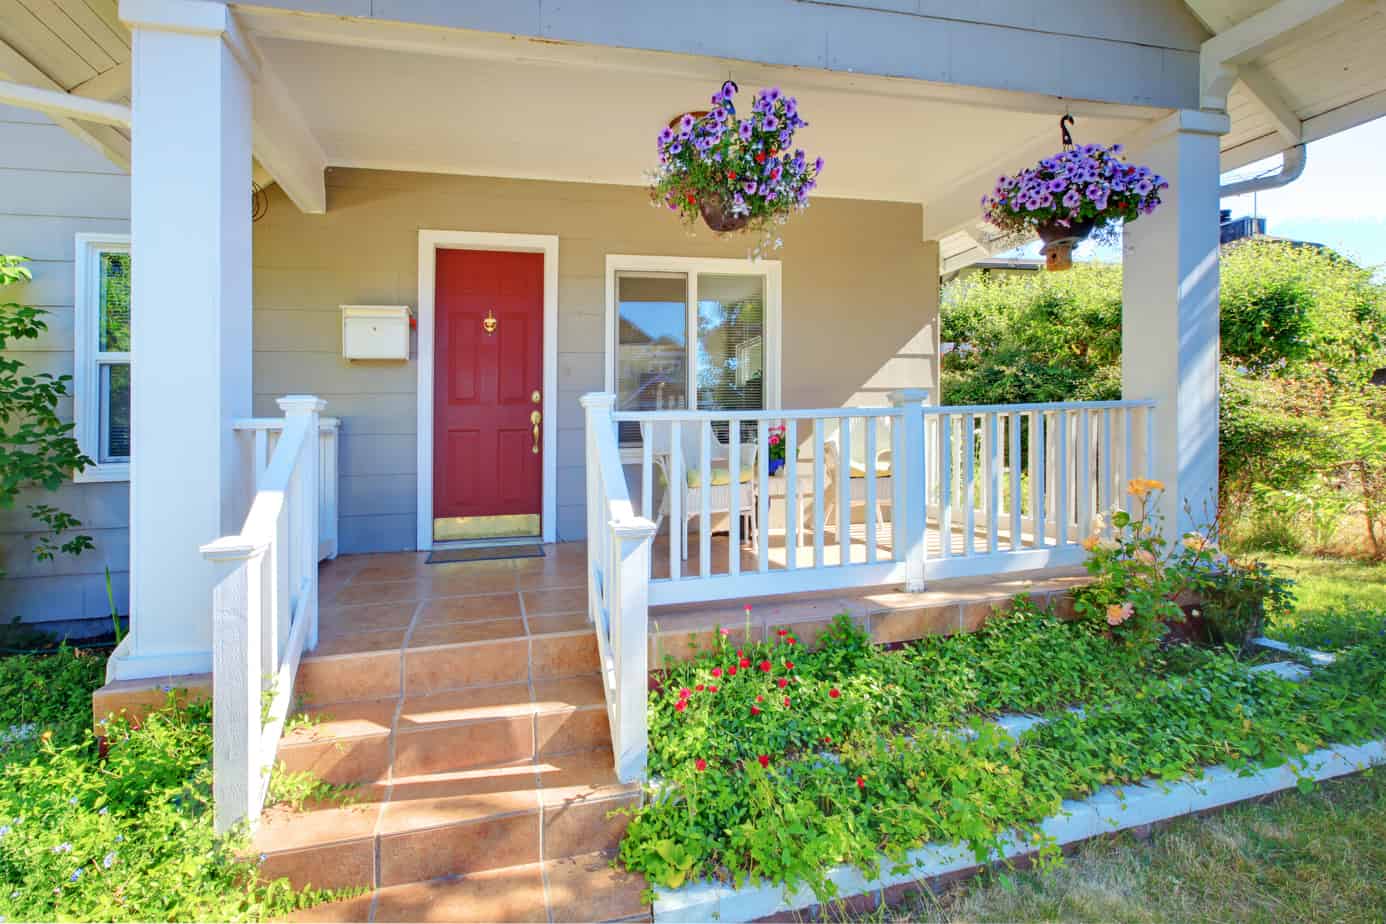 A front porch with a white railing and flower baskets leading to a red door.